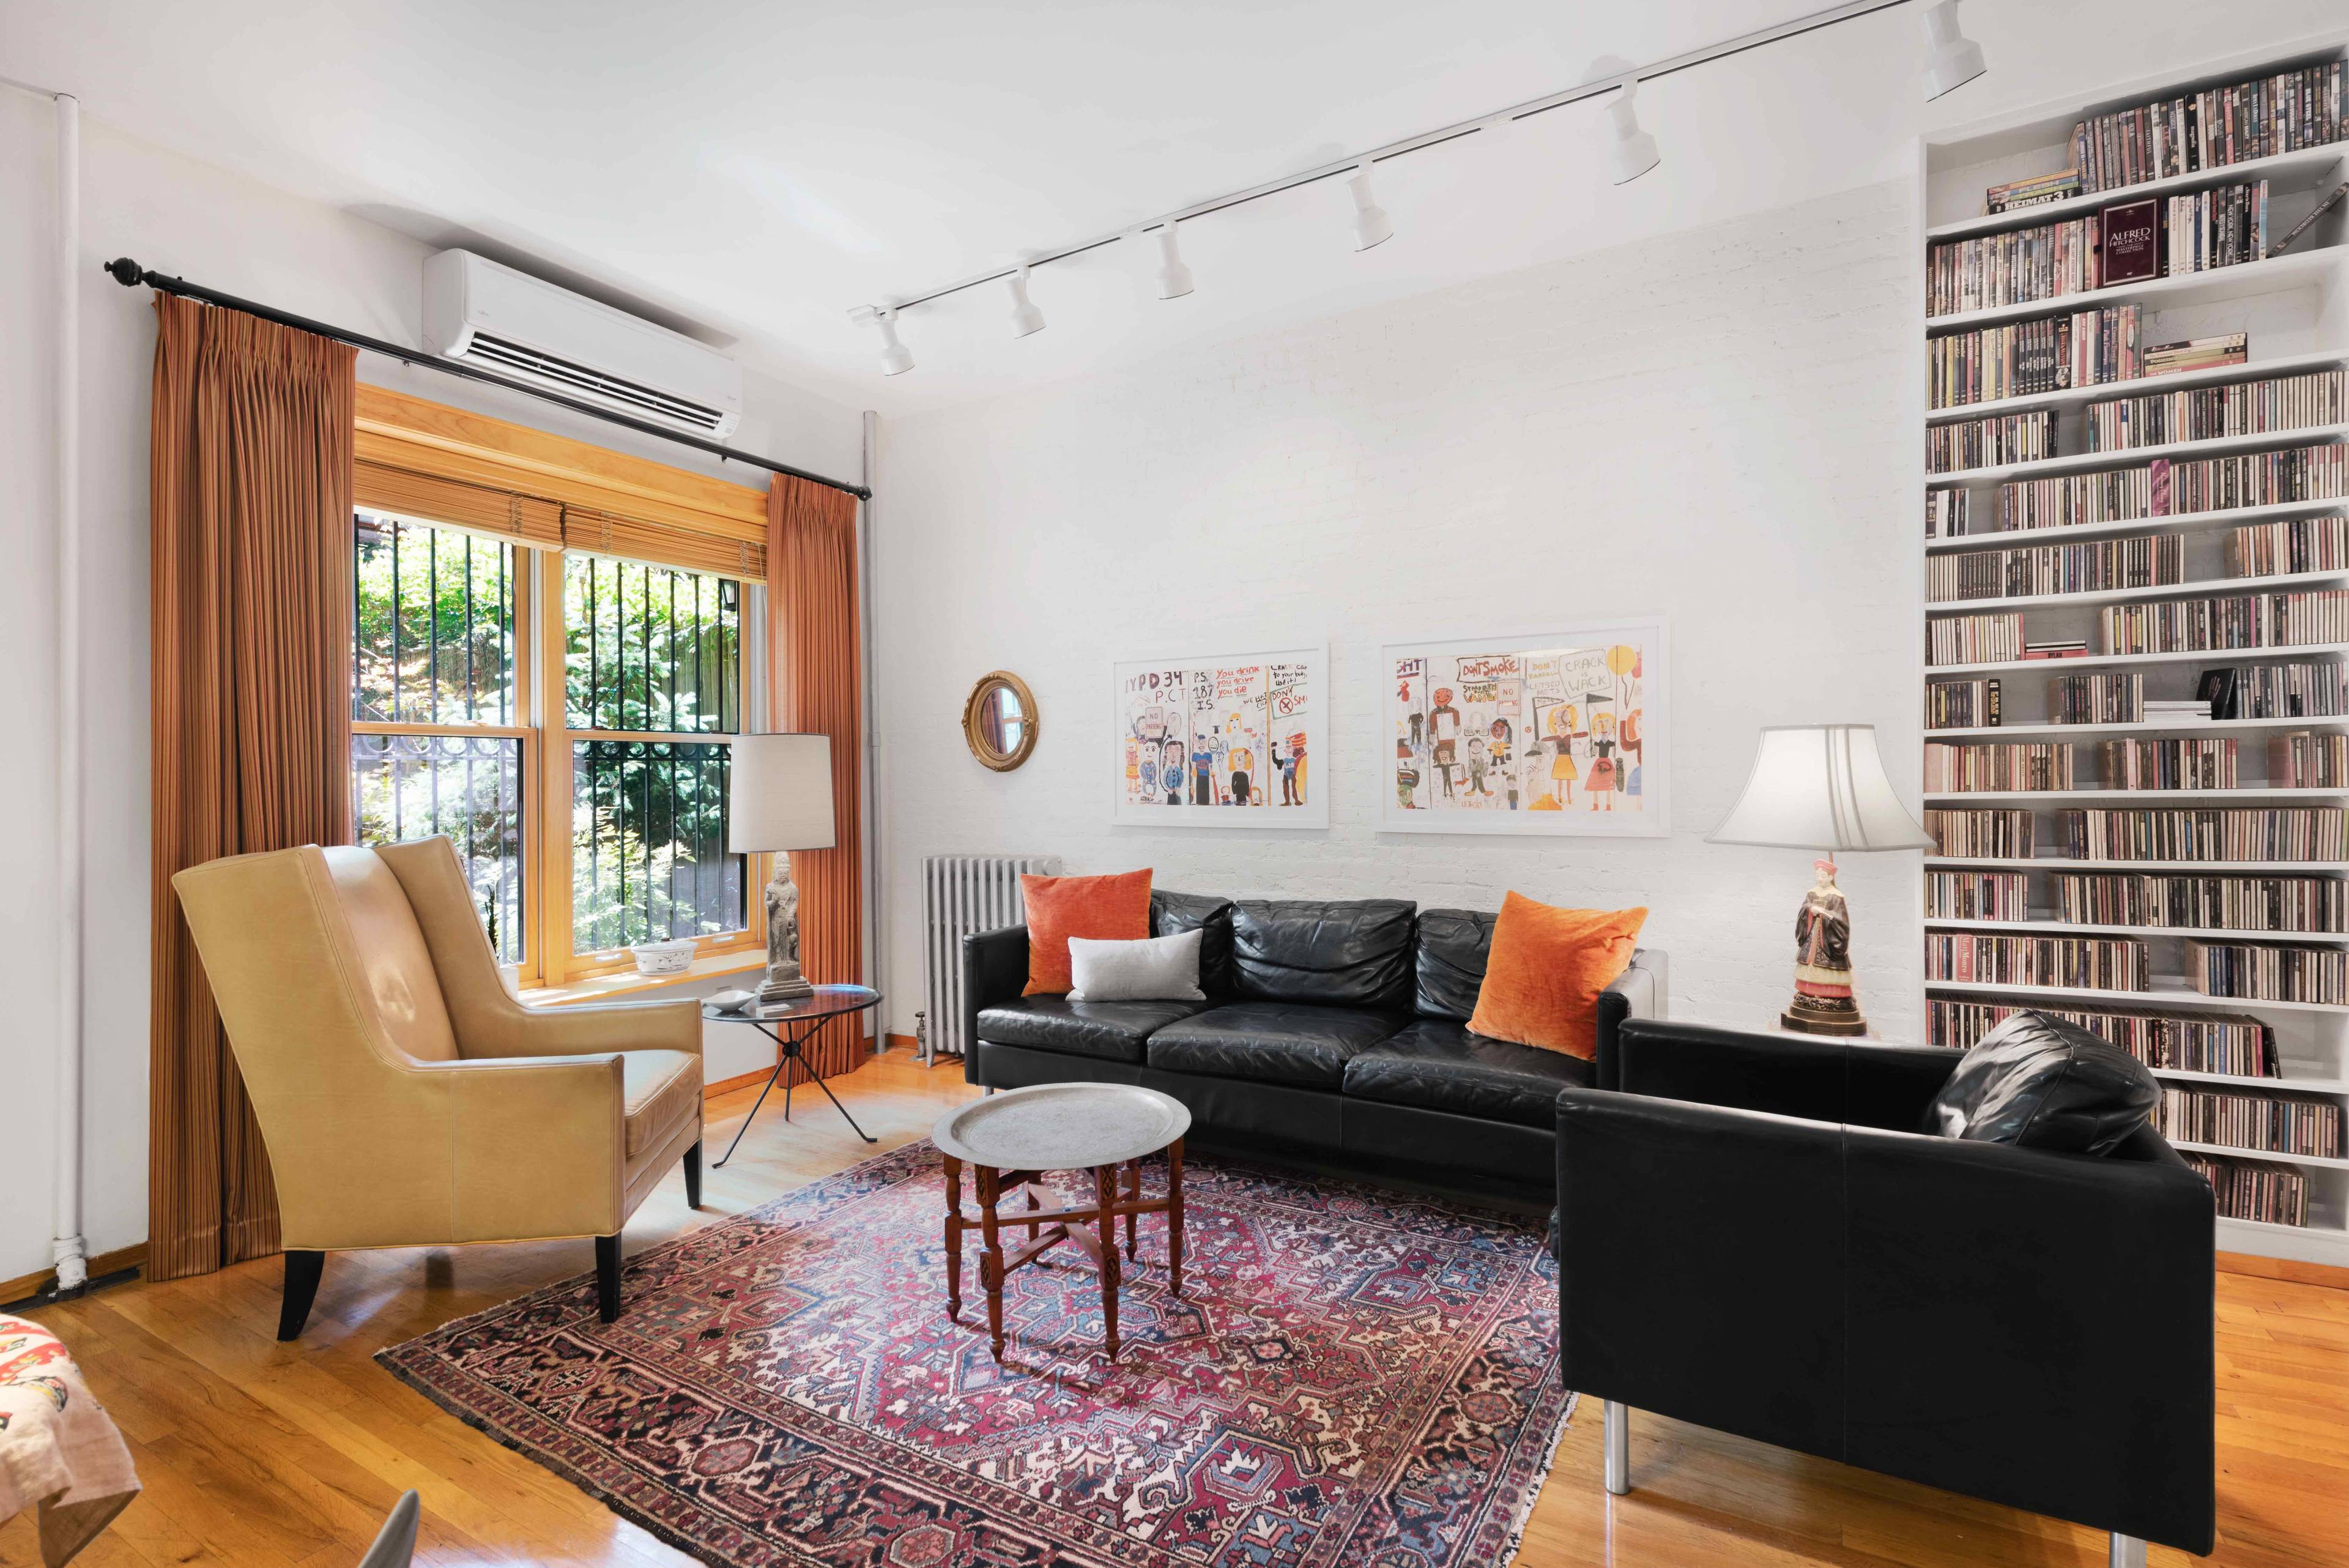 SHOWING MONDAY JUNE 17th 10a 6p By Appointment TRIPLEX w PRIVATE GARDEN and in unit WASHER DRYER Heart of Harlem This floor through quintessential New York City Brownstone with its ...